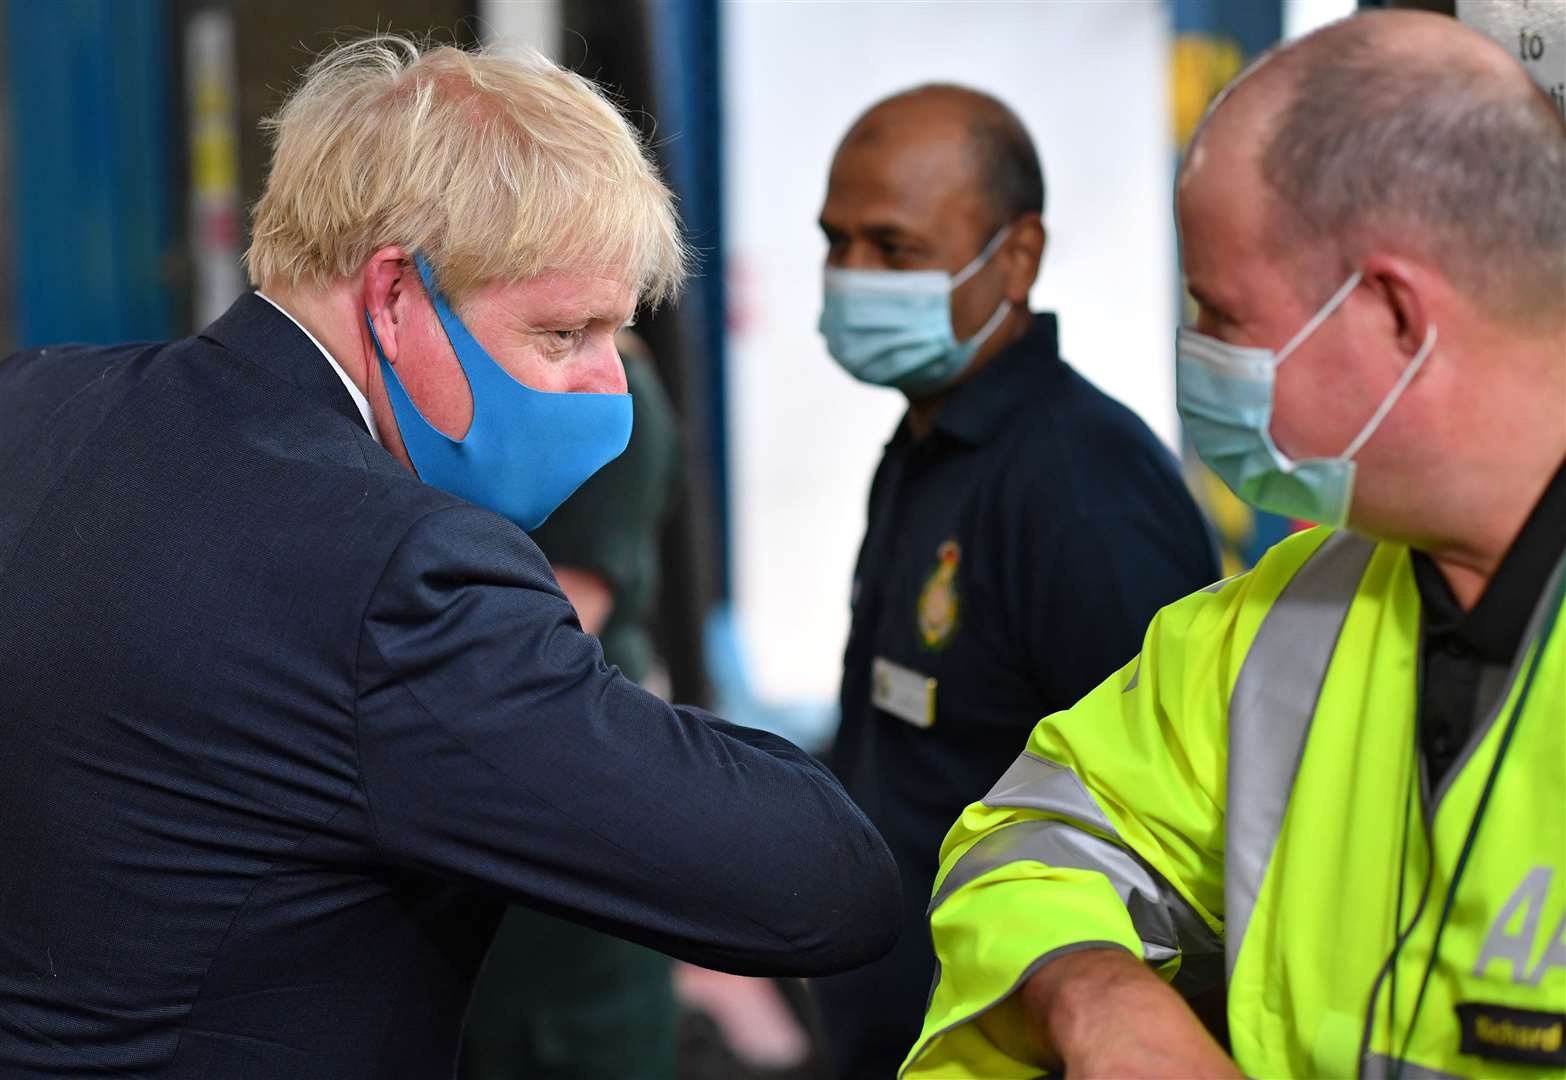 Boris Johnson, wearing a face mask, elbow bumps an employee during a visit to the London Ambulance Service (Ben Stansall/PA)